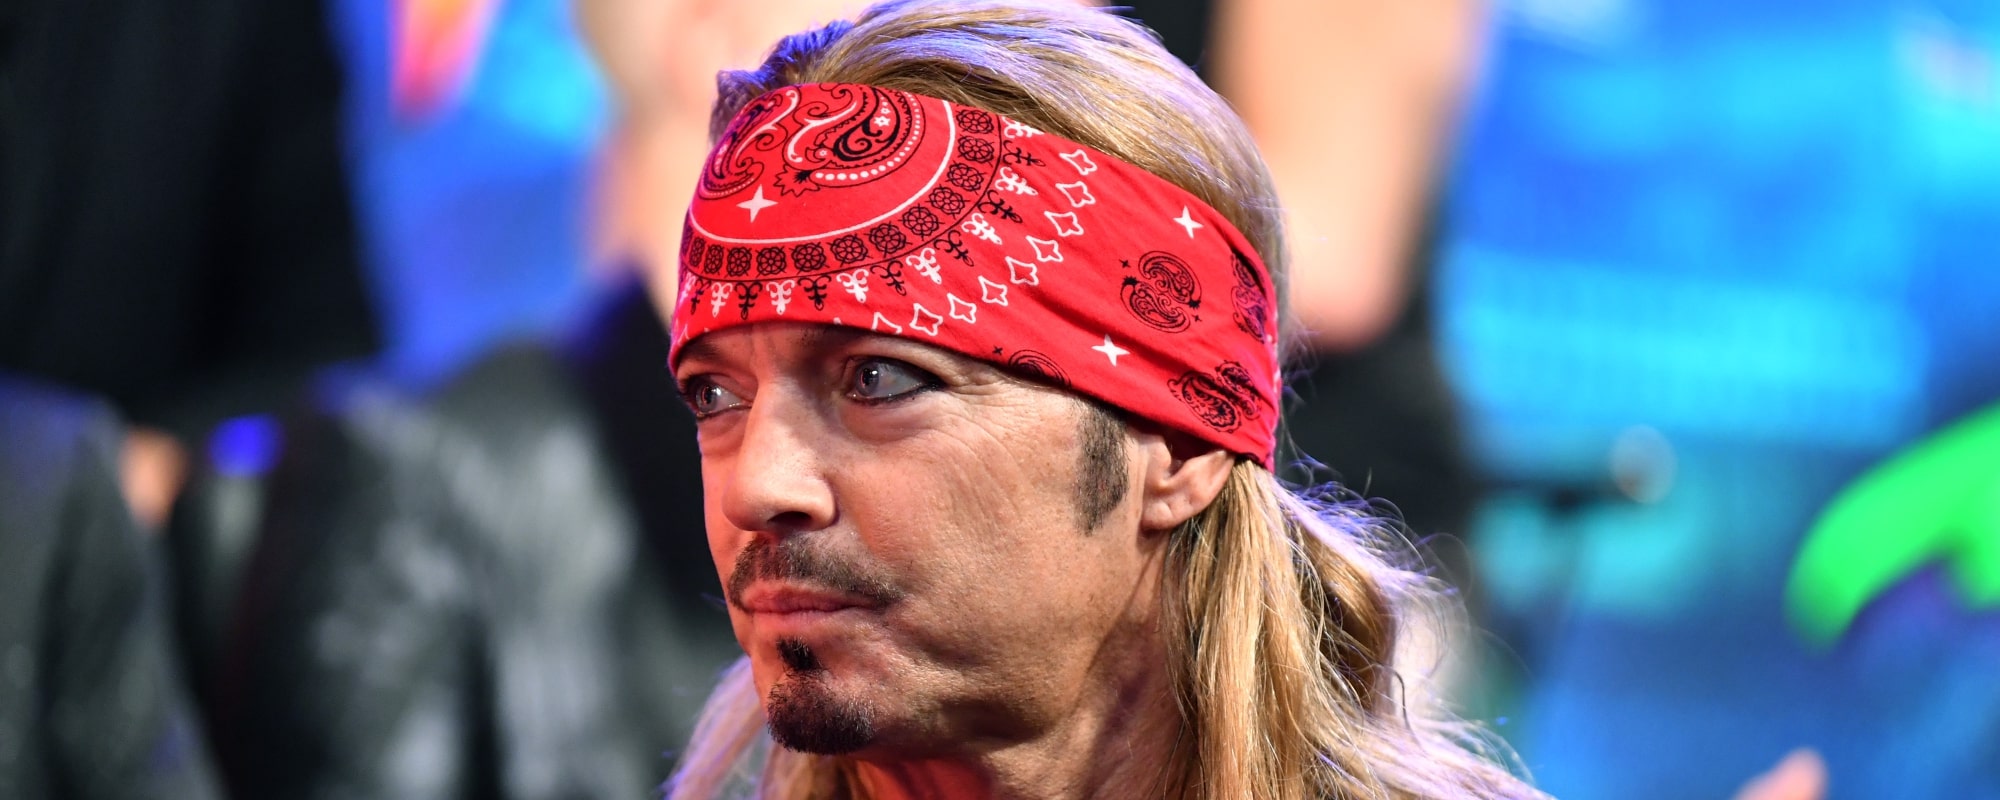 Bret Michaels Shares Health Update, Image from Hospital After Latest Concert